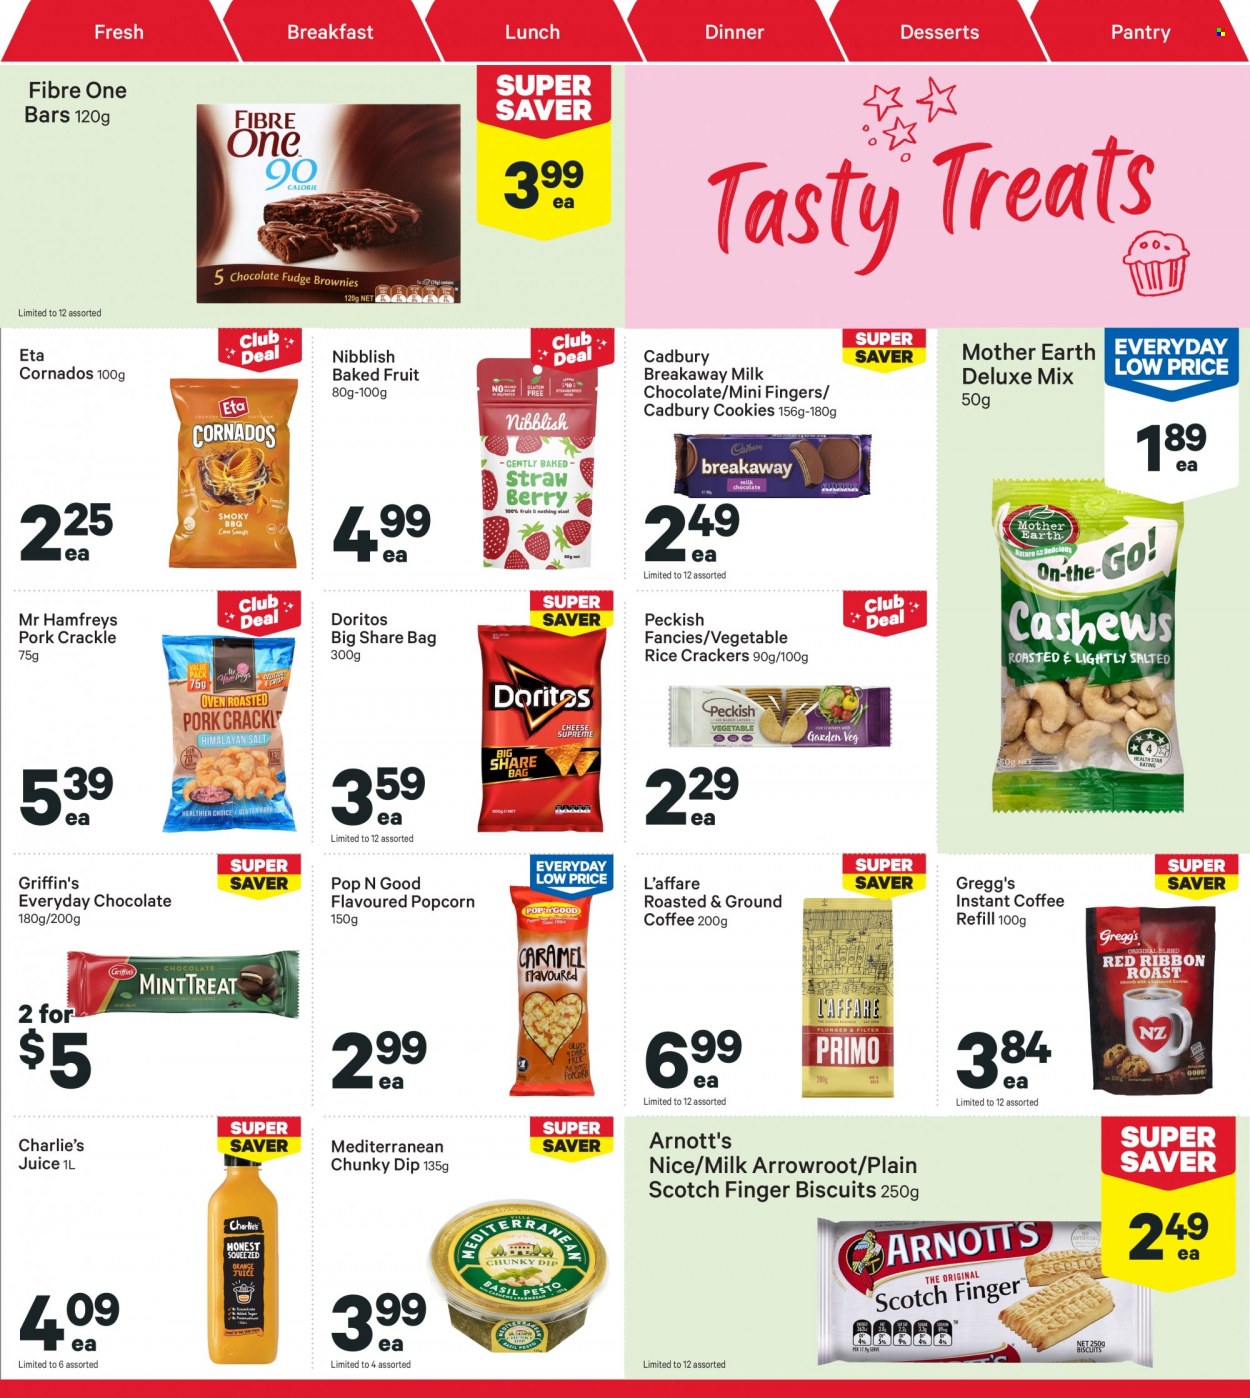 thumbnail - New World mailer - 30.01.2023 - 05.02.2023 - Sales products - dip, cookies, milk chocolate, chocolate, crackers, biscuit, Cadbury, Griffin's, Mother Earth, Doritos, popcorn, rice crackers, Nibblish, baked fruit, juice, coffee, instant coffee, ground coffee. Page 23.